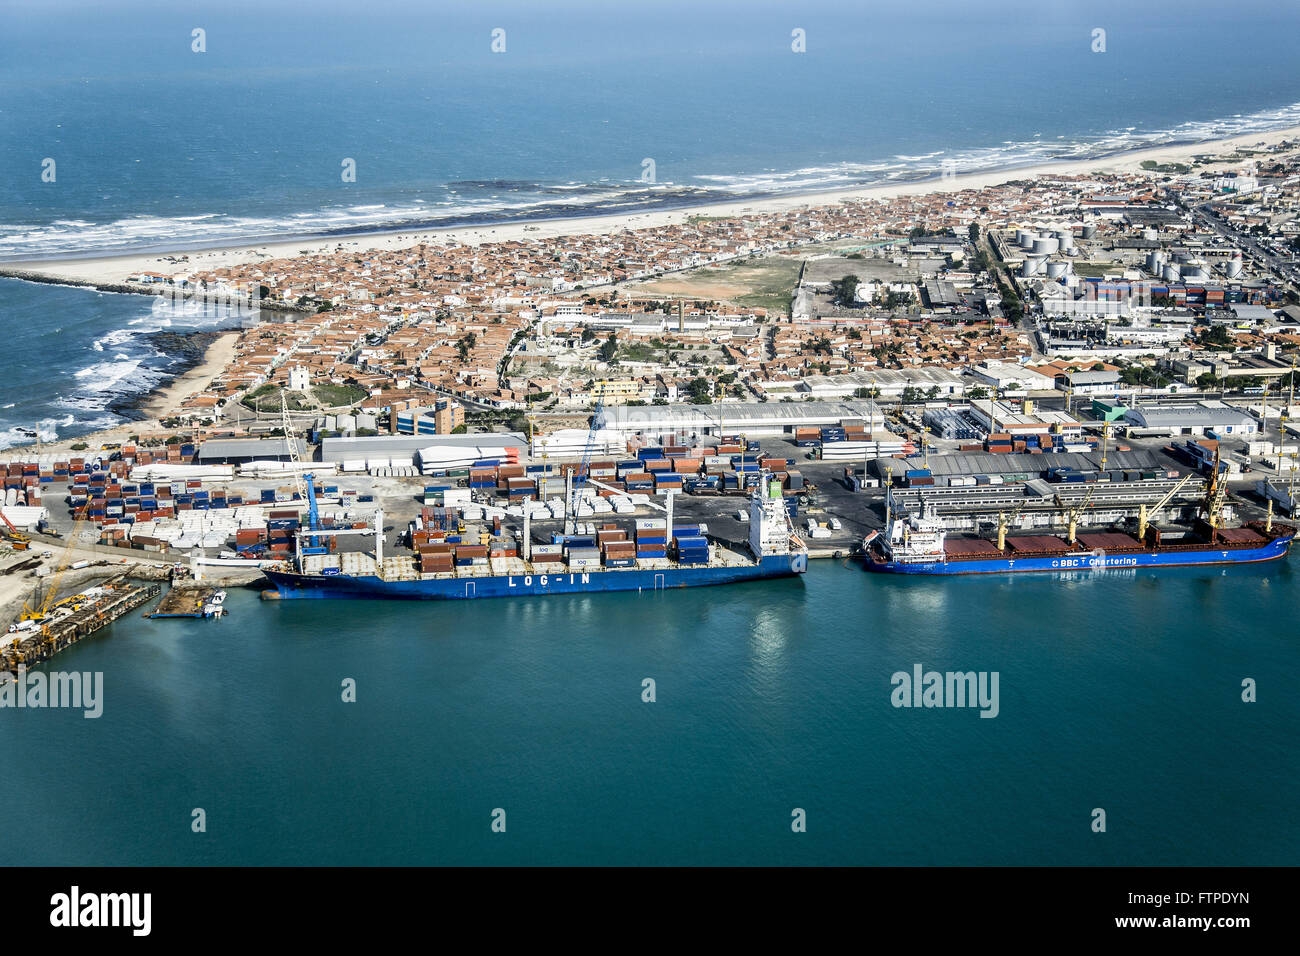 Aerial view of the commercial wharf in port with Futuro Beach in the background Stock Photo